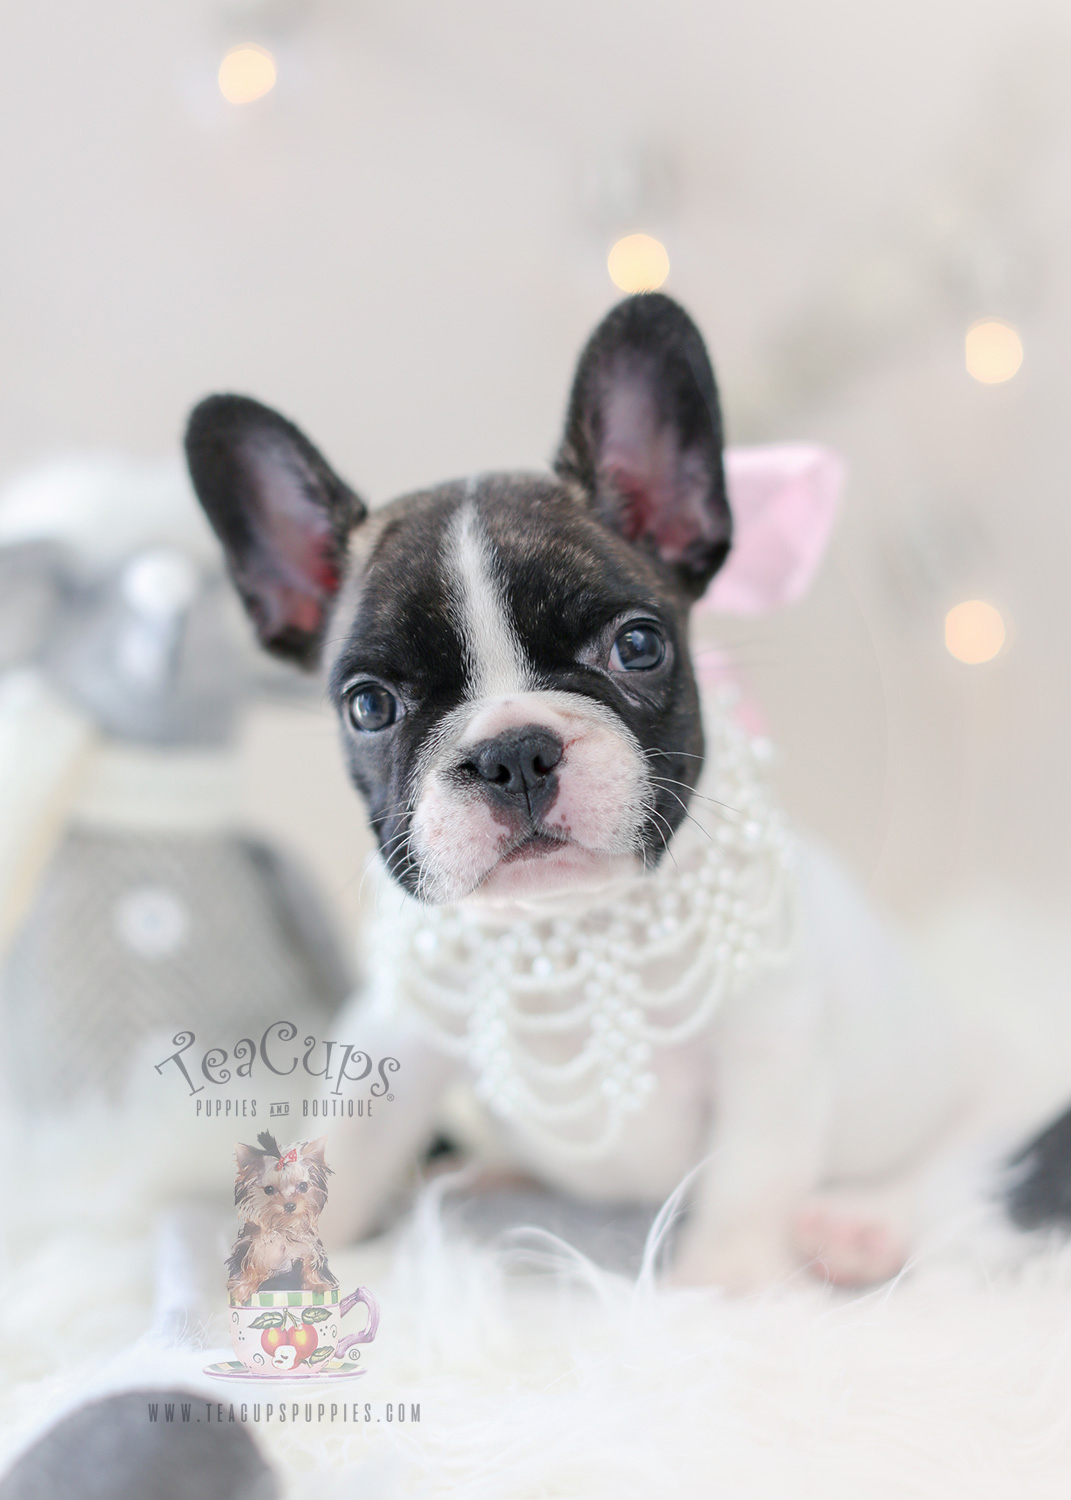 The French Bulldog of your dreams is here! Teacup